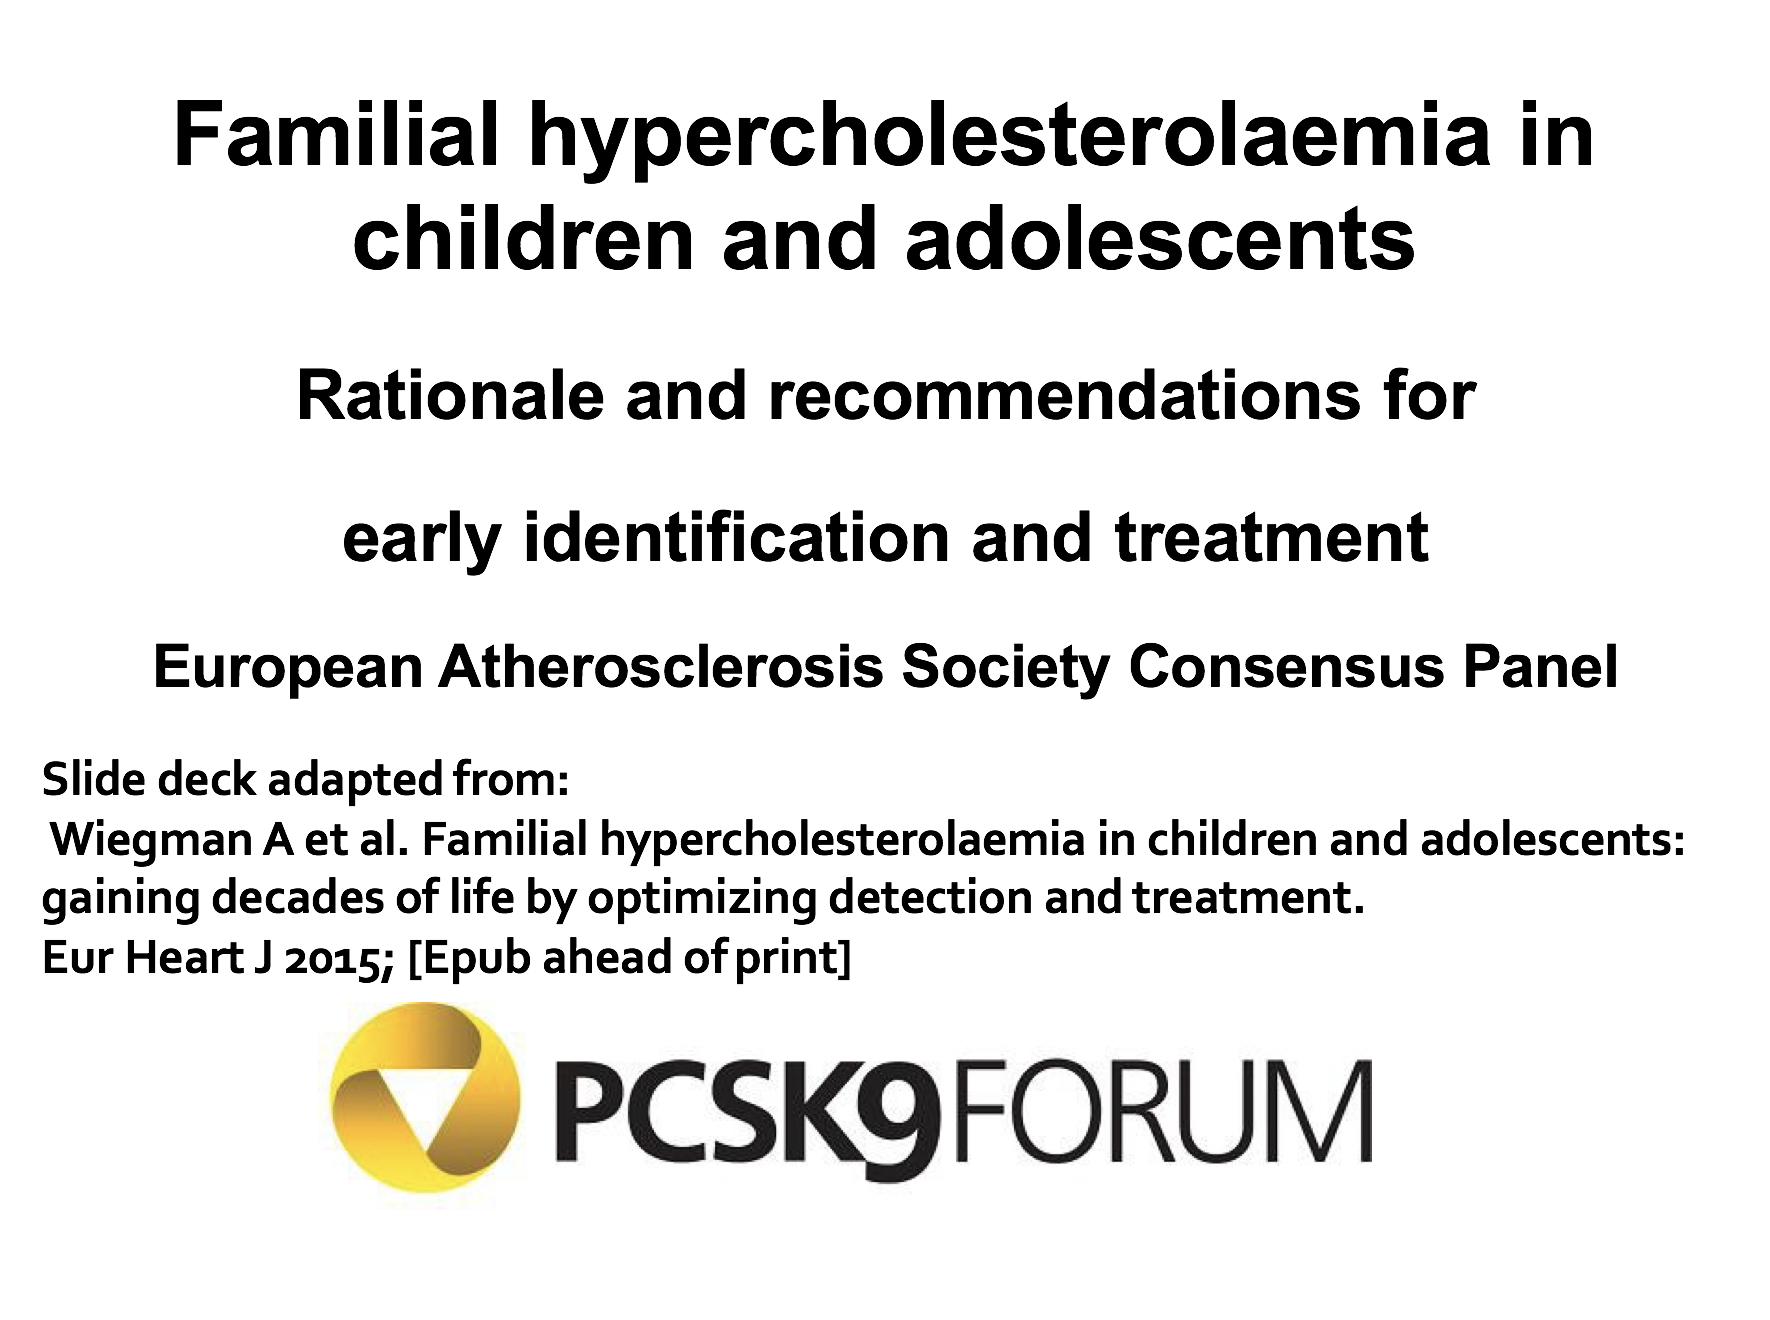 FH in children and adolescents